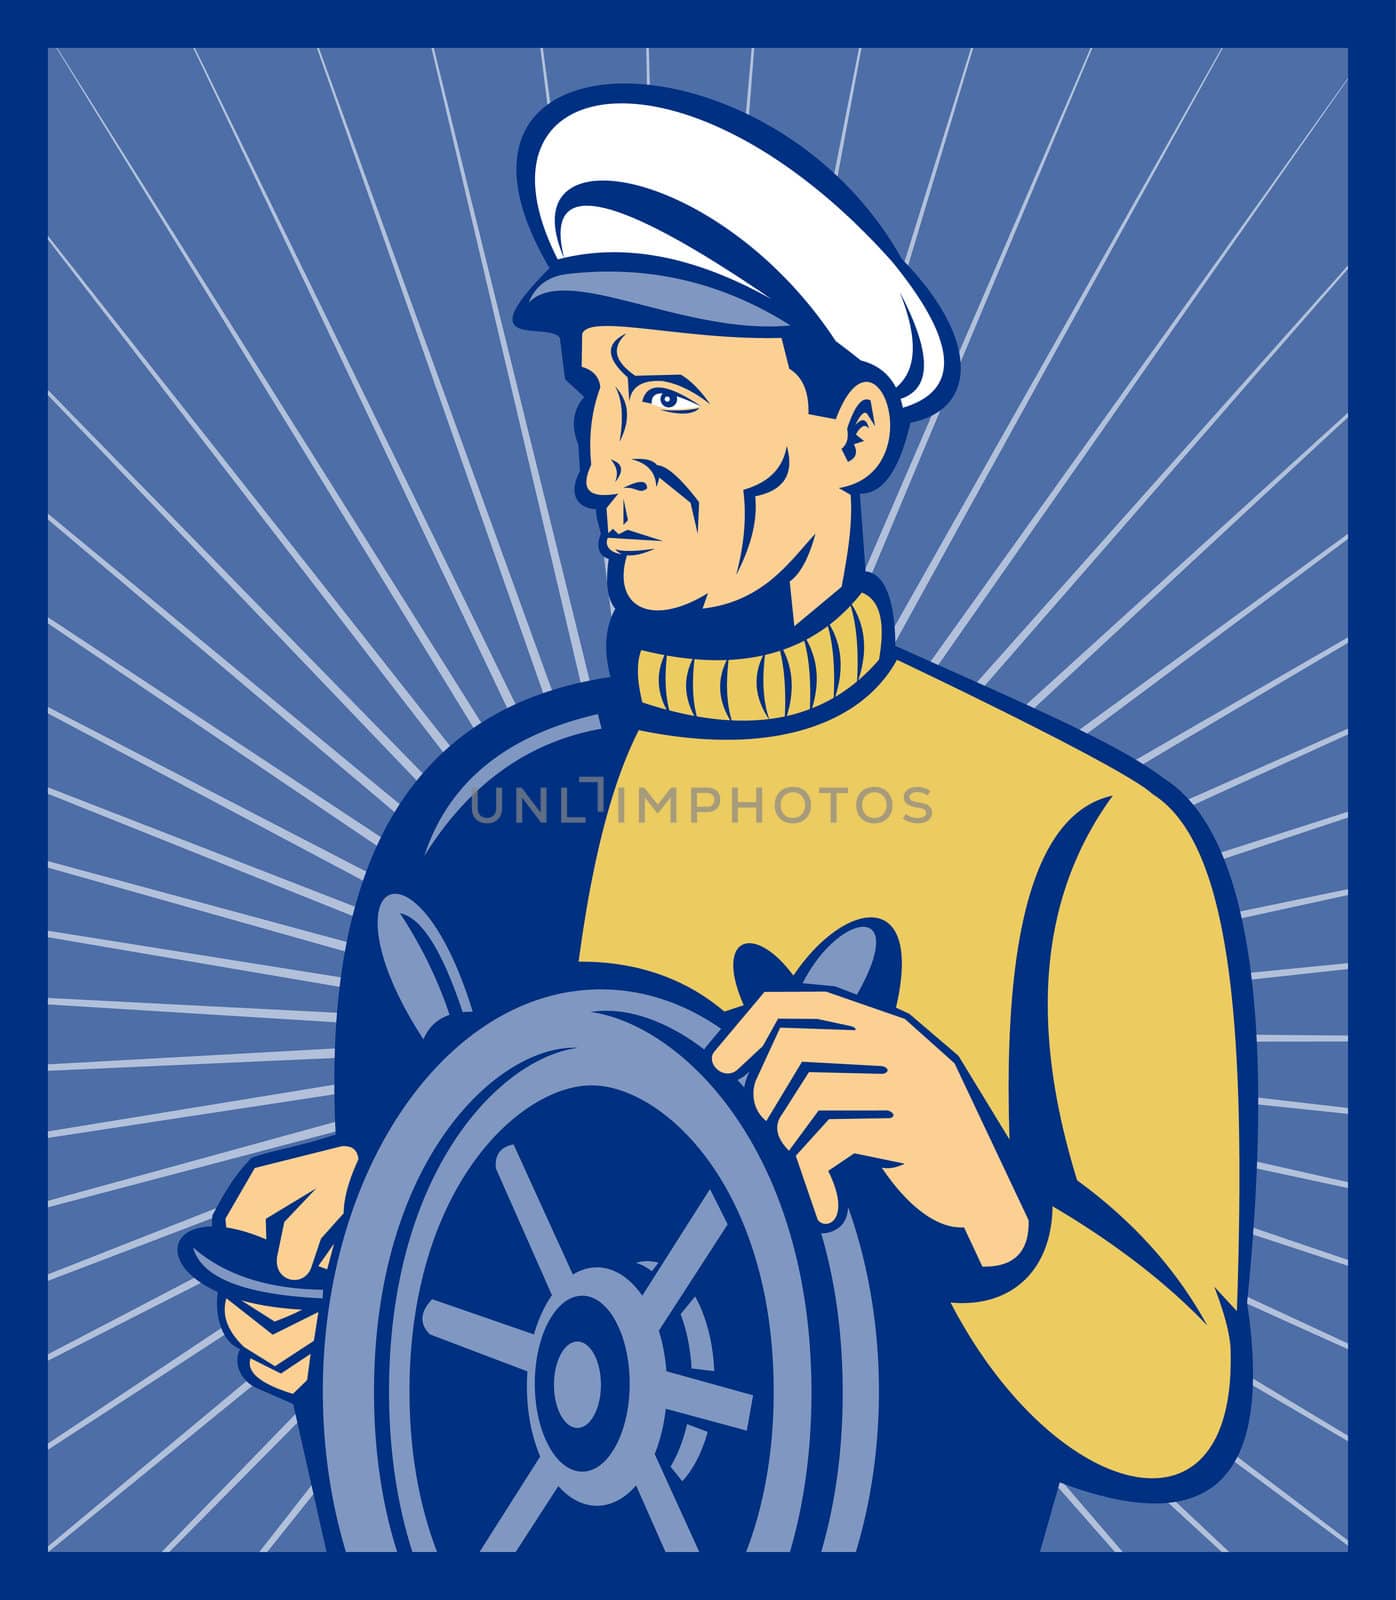 Imagery shows a ship captain at the helm done done in retro style